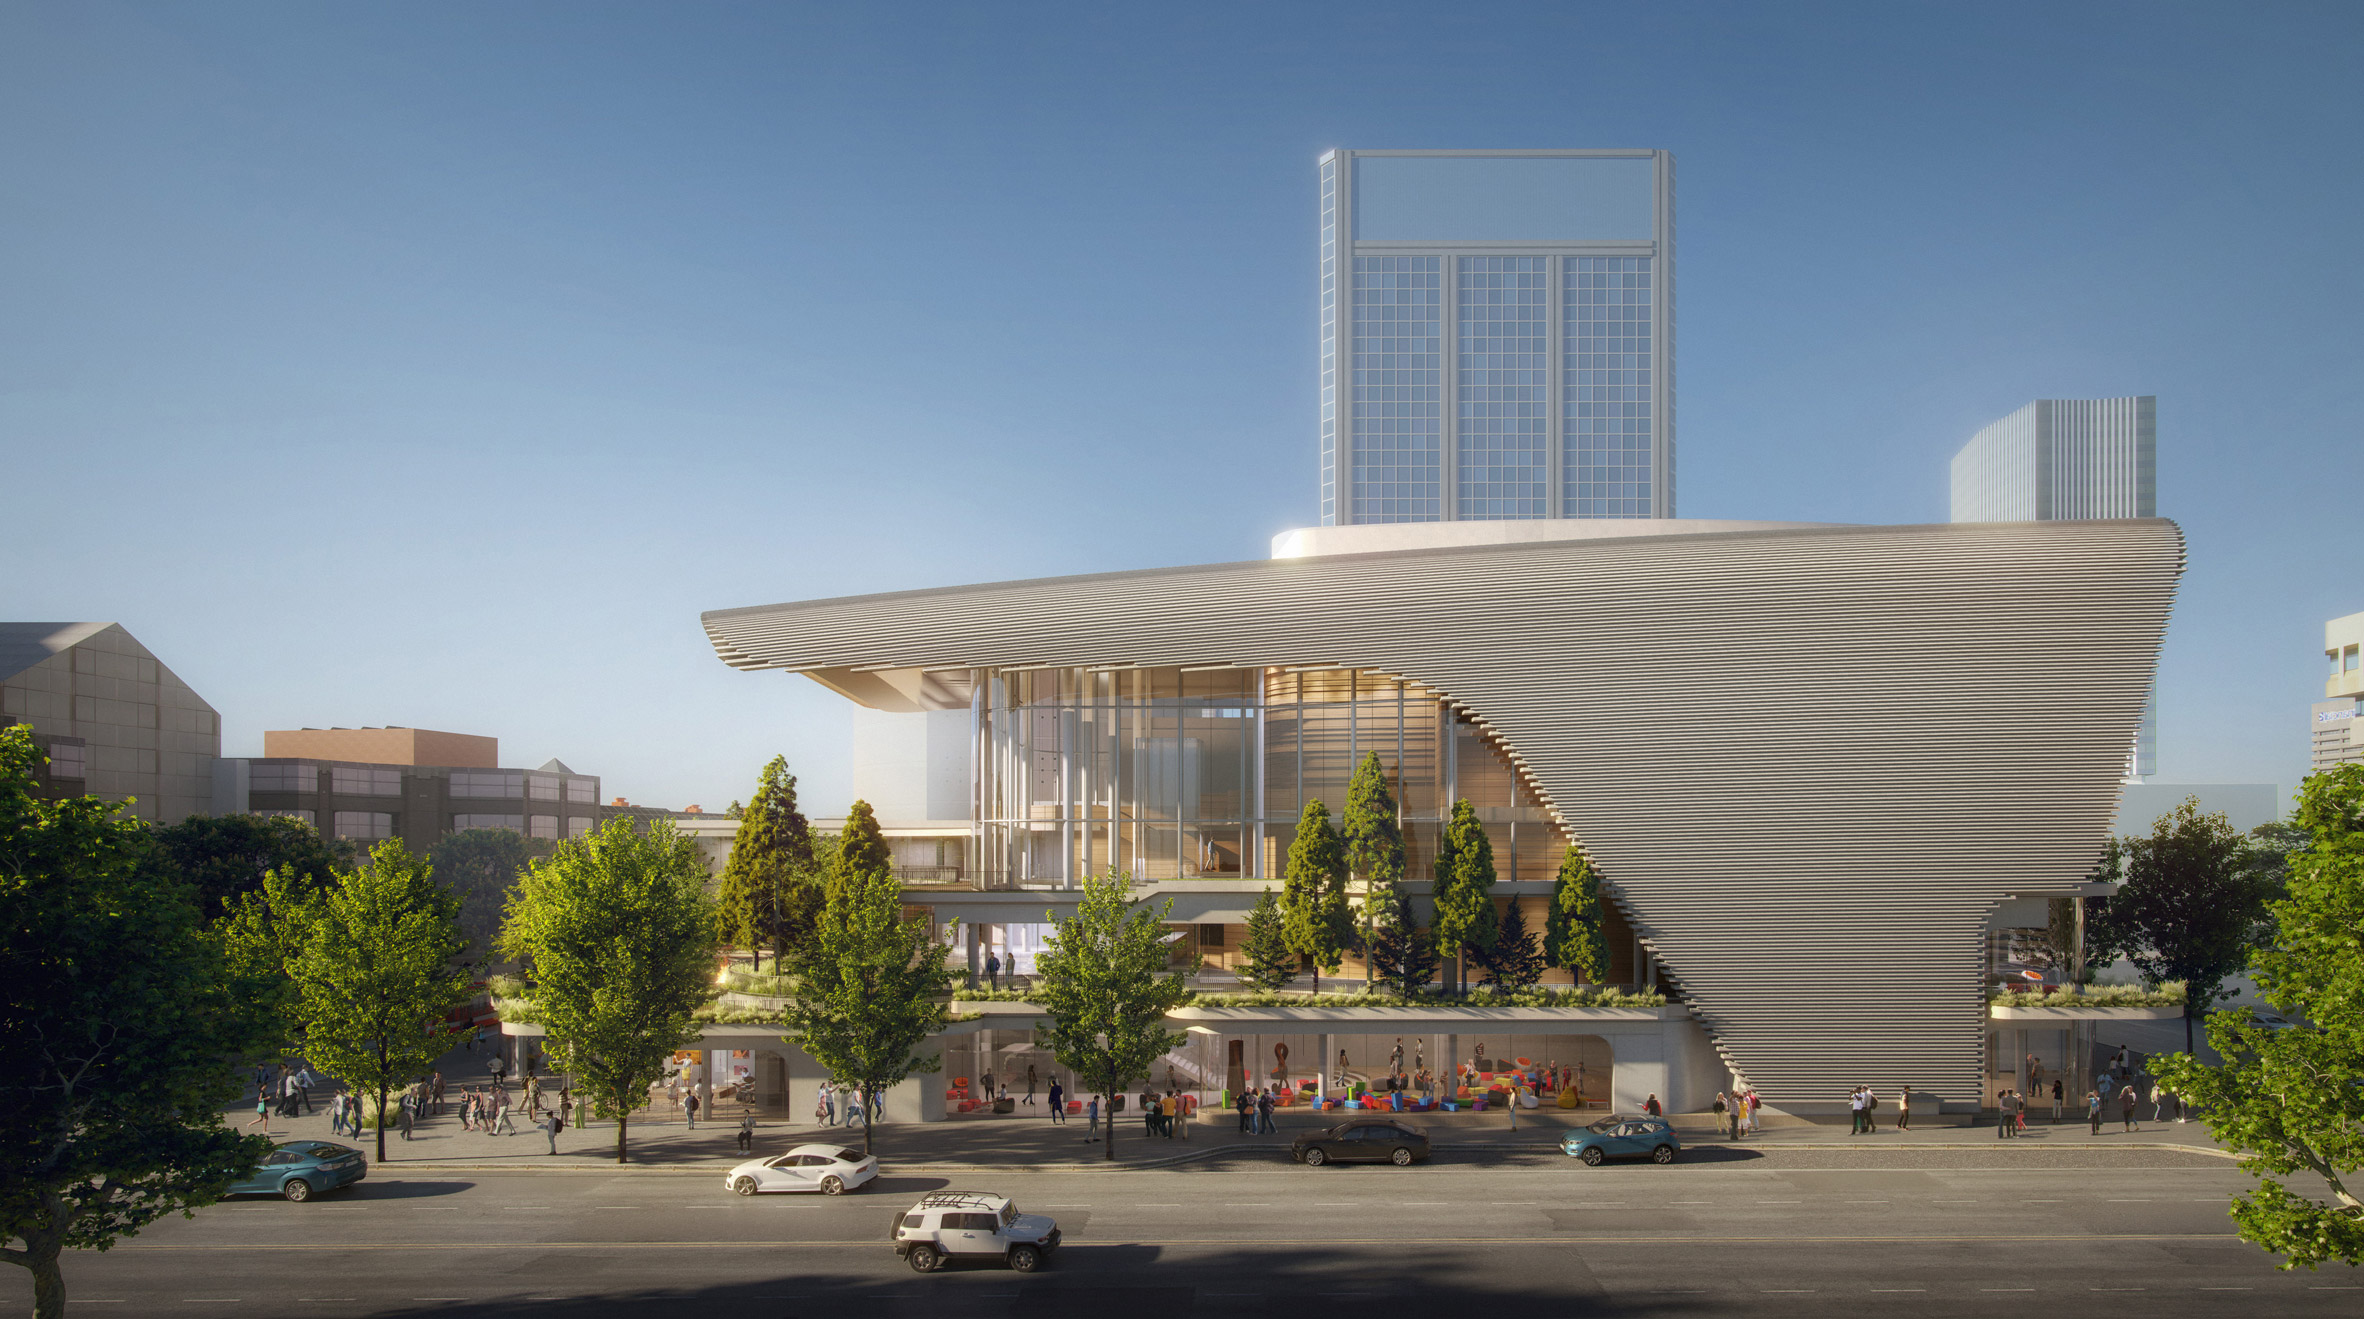 Winspear Project by Andrew Bromberg